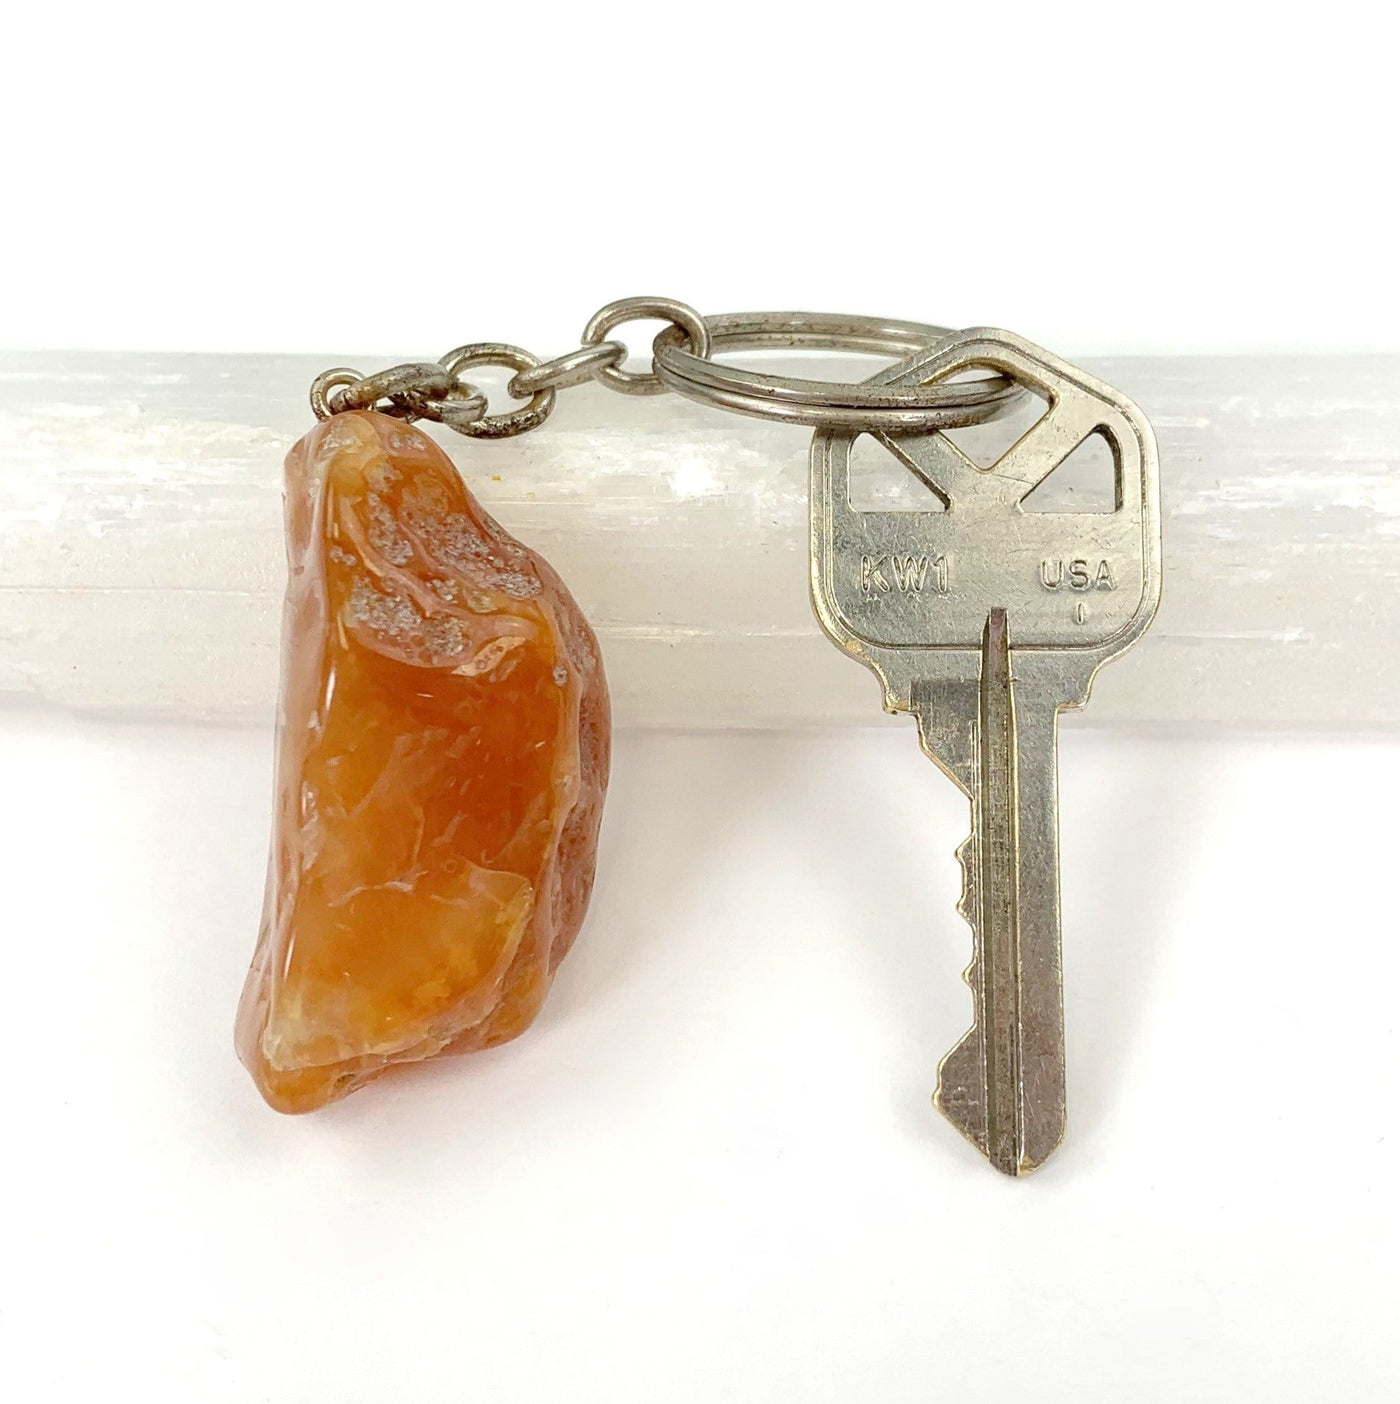 tumbled carnelian keychain displayed next to a key for size reference with silver link and hoop ring